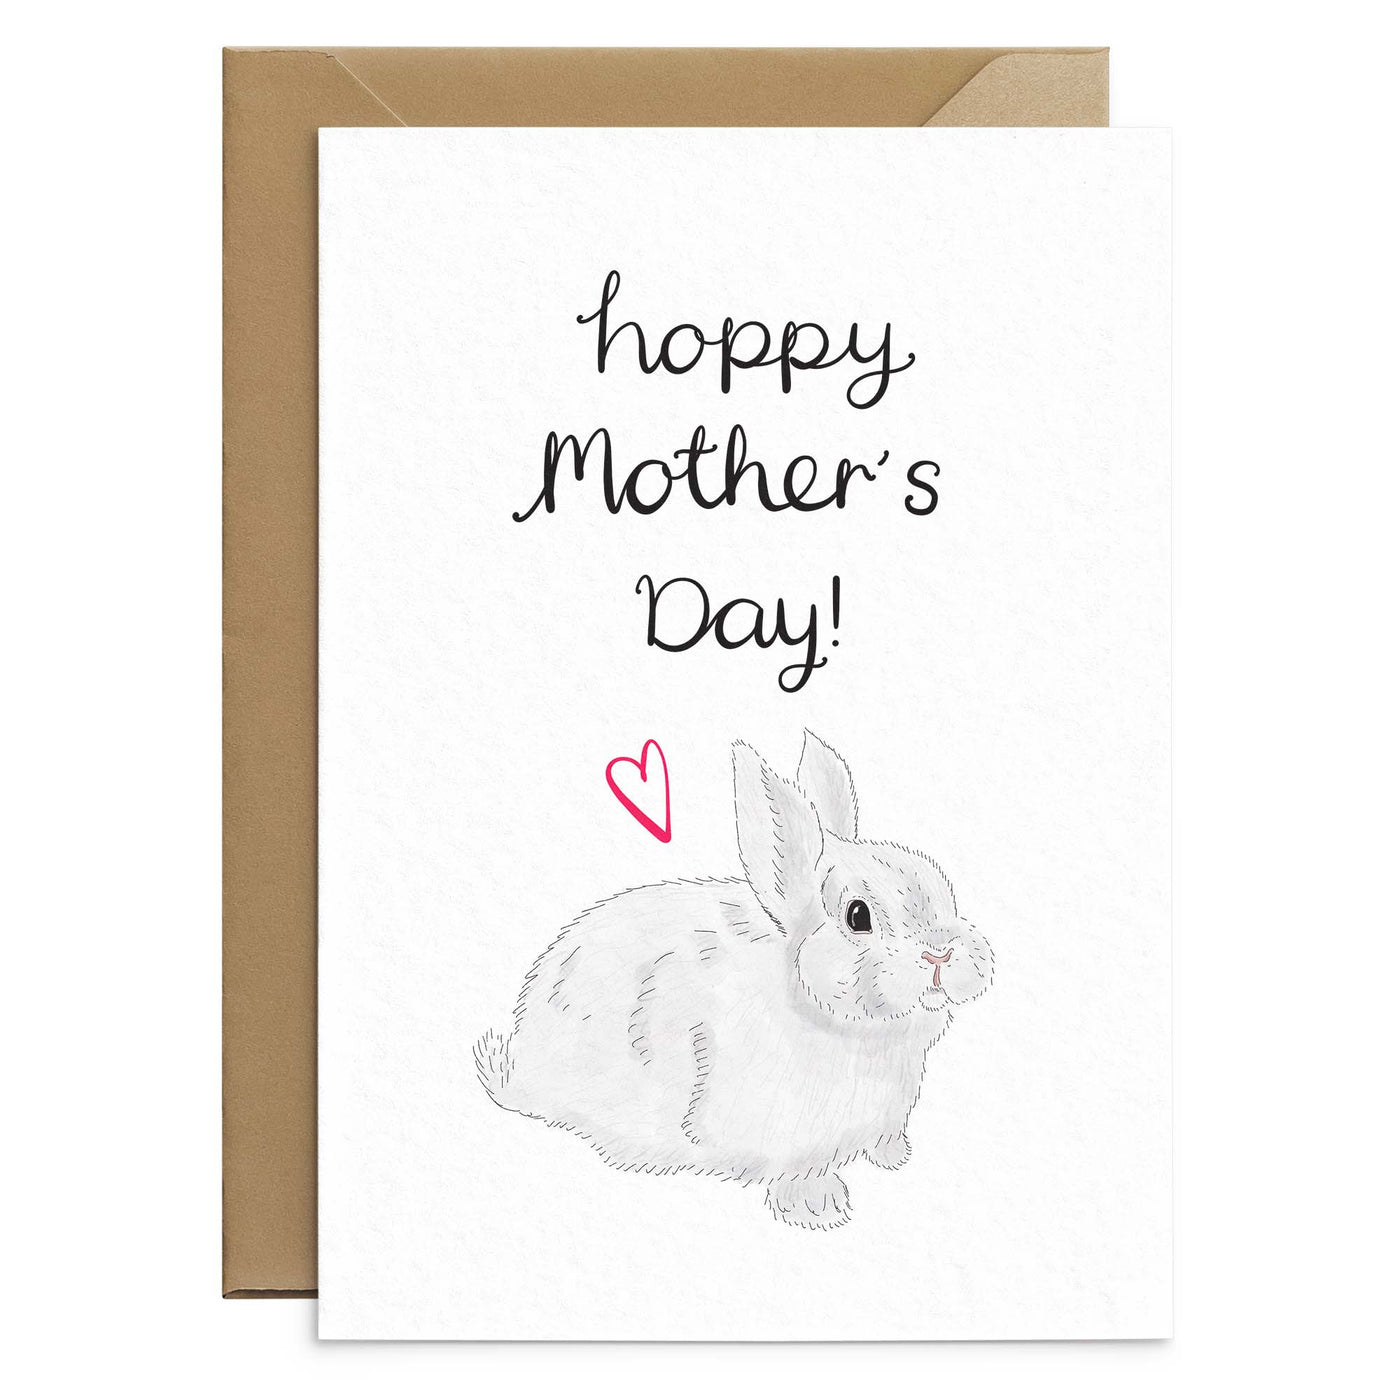 Bunny mother's day greetings card with brown Kraft envelope. Text reads 'hoppy Mother's Day' with small red love heart. Illustration of a grey/white bunny rabbit. Greetings card by Poppins and co.